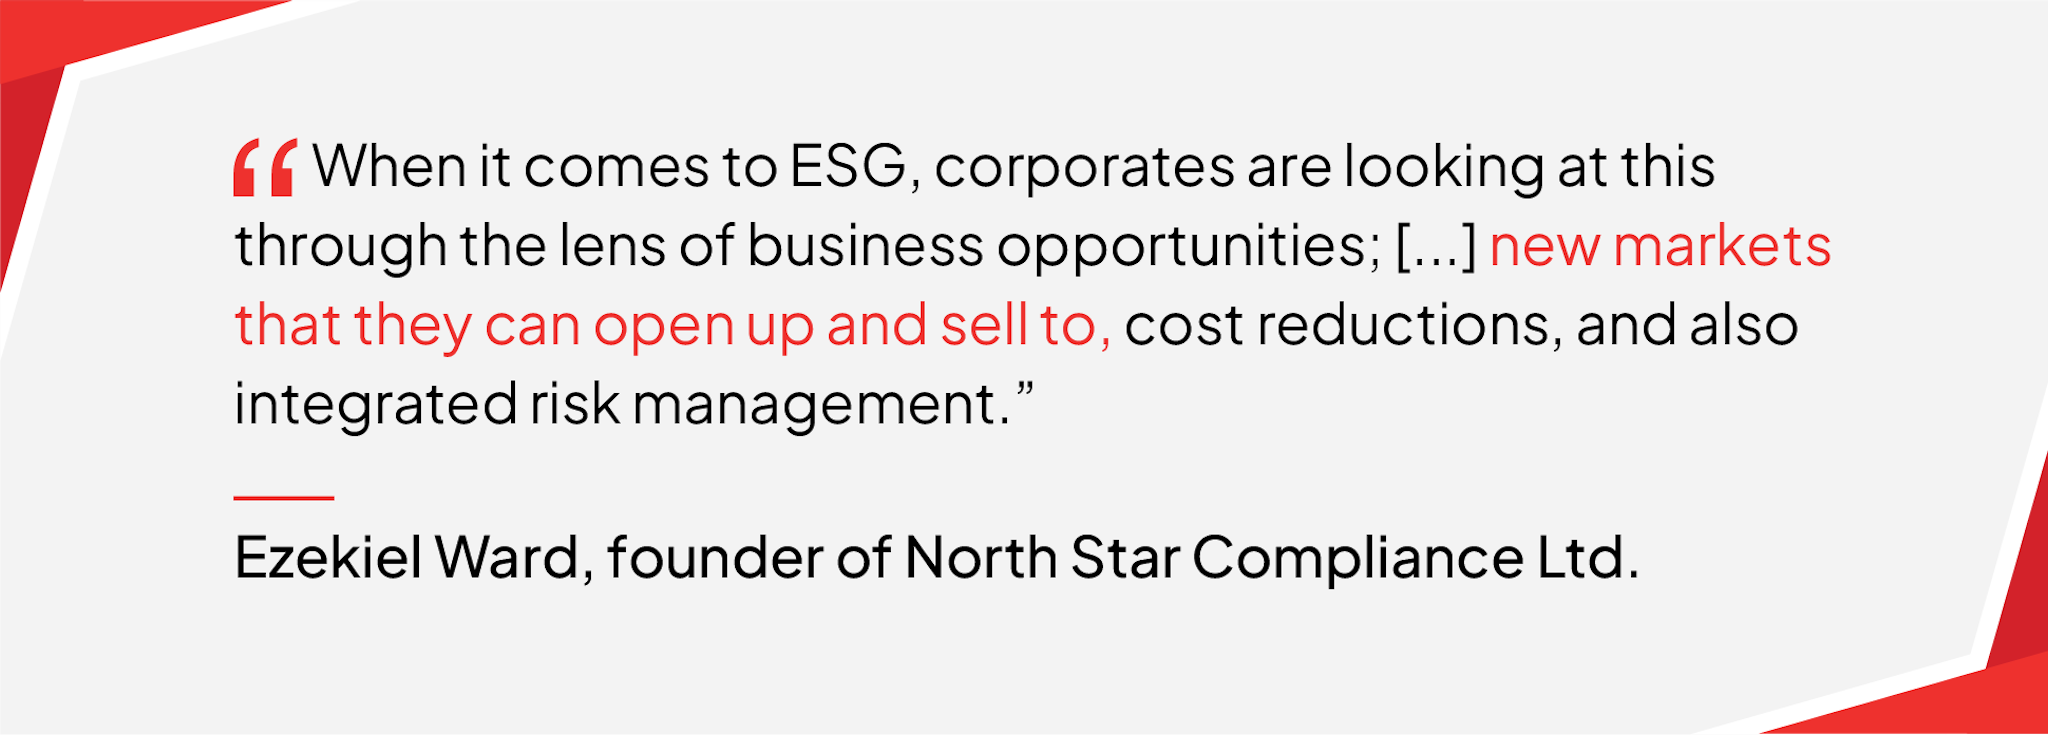 When it comes to ESG, corporates are looking at this through the lens of business opportunities; […] new markets that they can open up and sell to, cost reductions, and also integrated risk management. - Quote by Ezekiel Ward, founder of North Star Compliance Ltd.